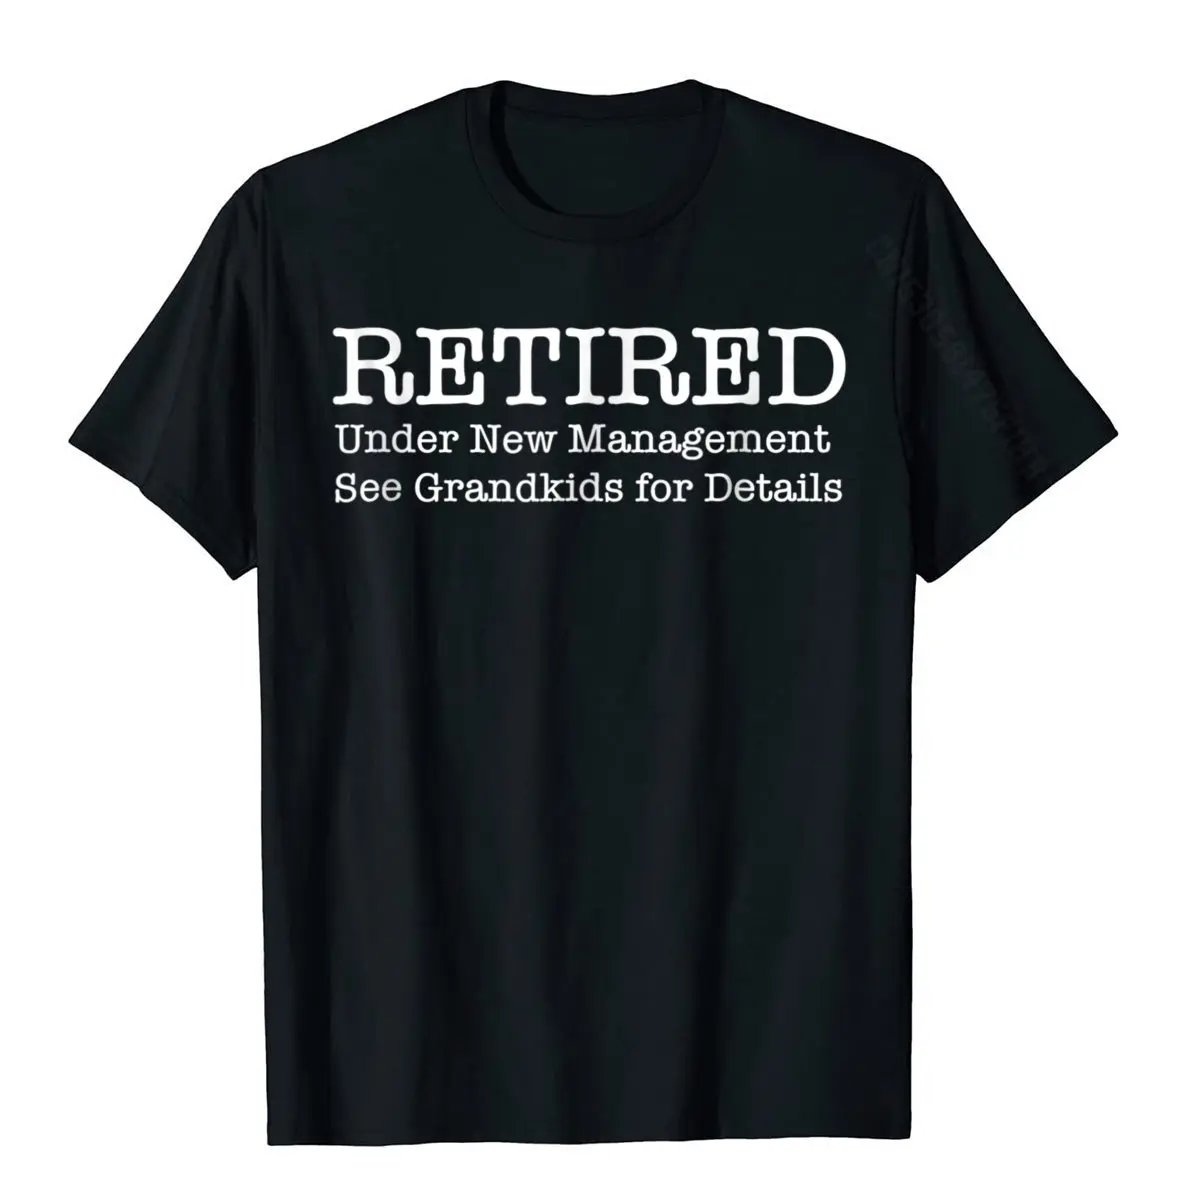 Retired Under New Management See Grandkids Shirt Classic Gift T Shirt Cotton Tshirts For Men Printed On